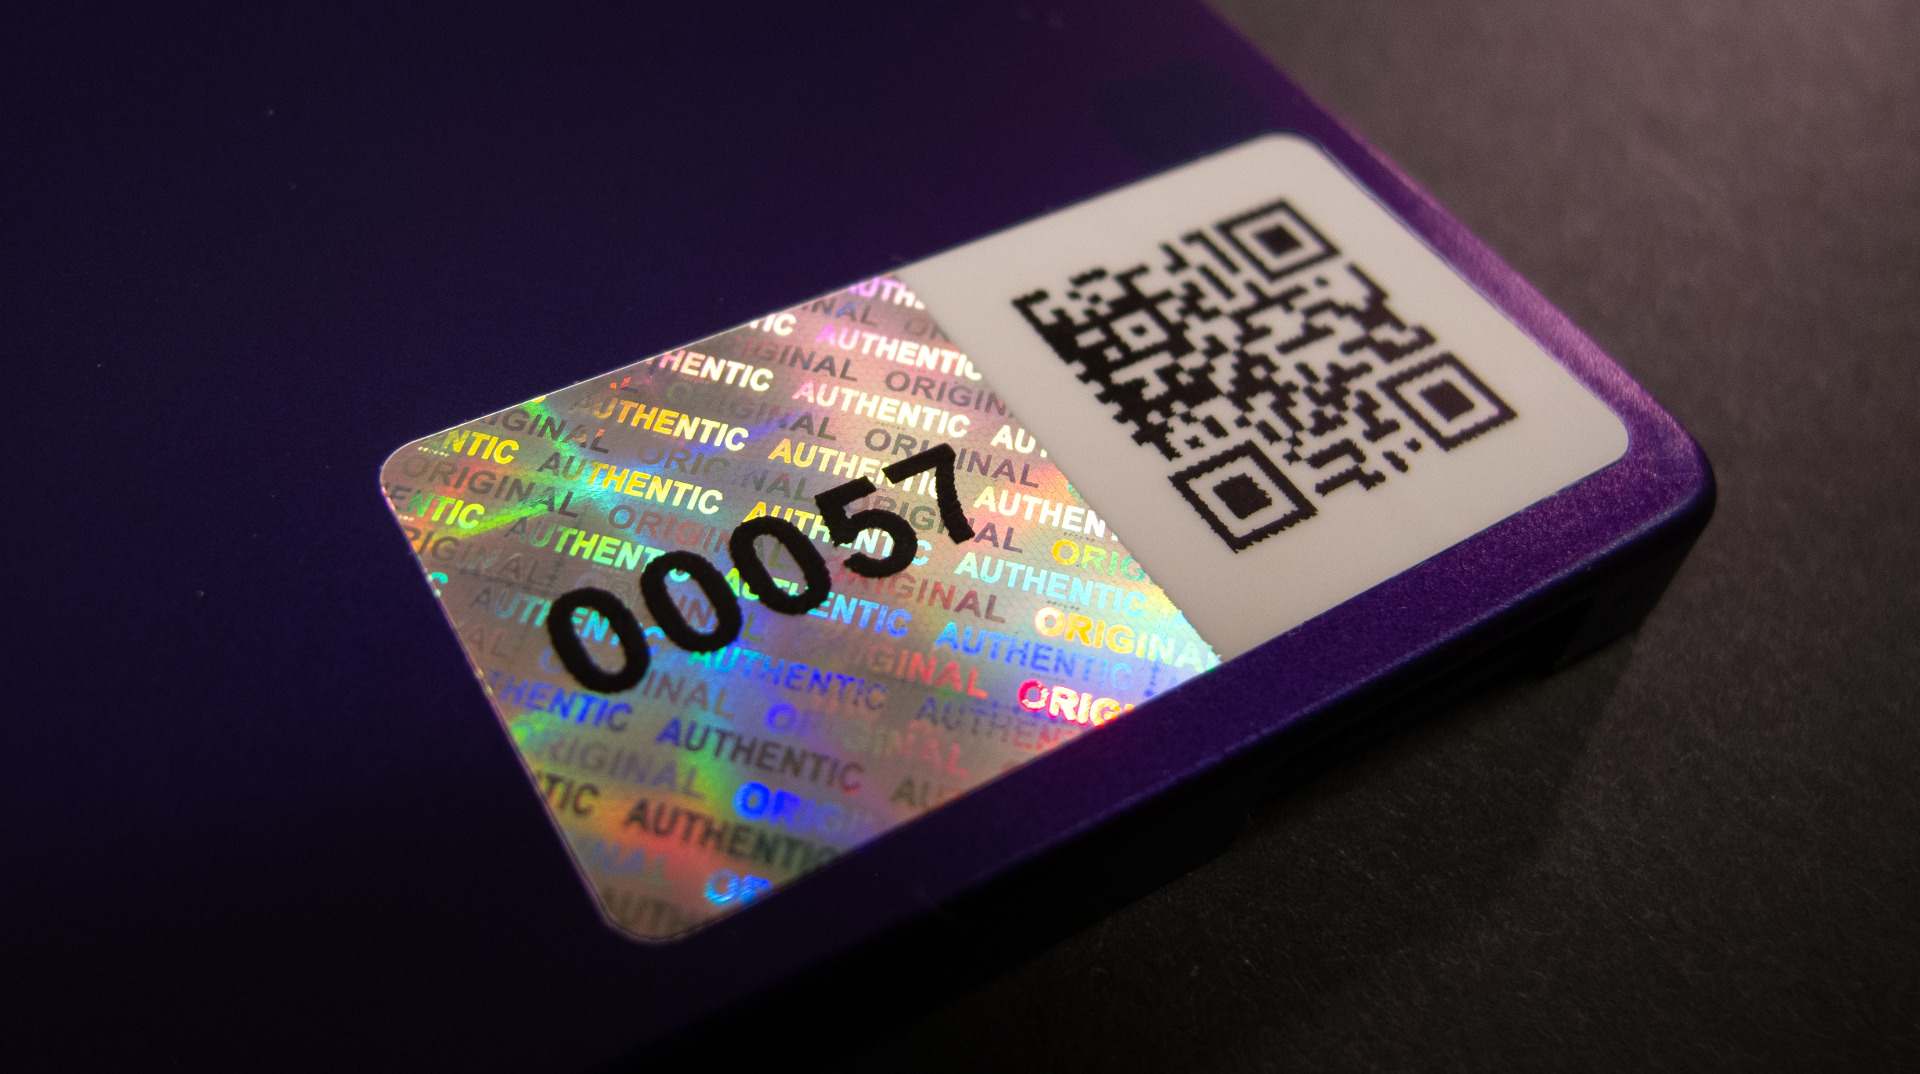 holographic label with QR code applied to SSD